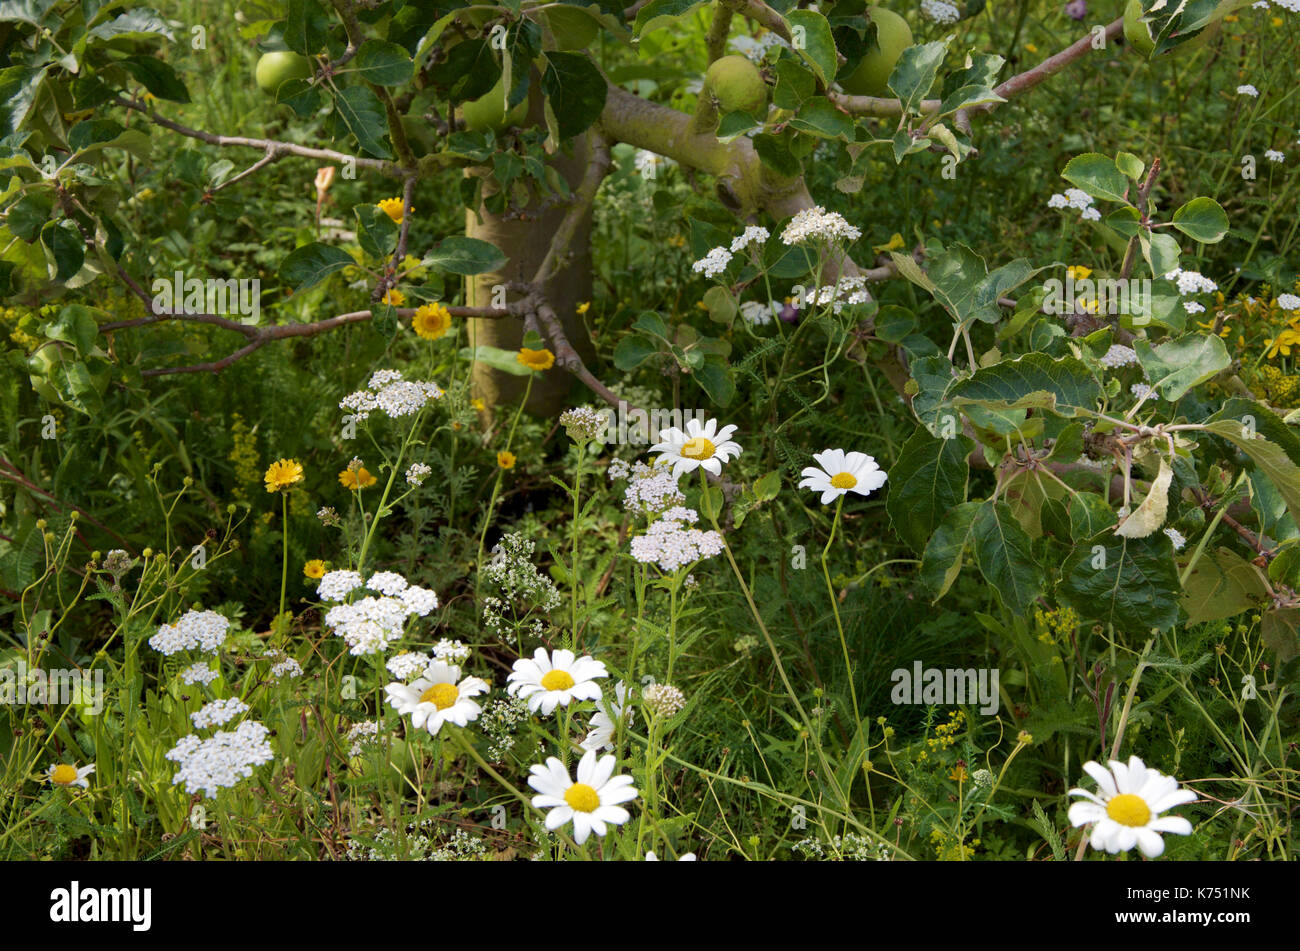 Meadow with wild flowers around the base of an apple tree Stock Photo